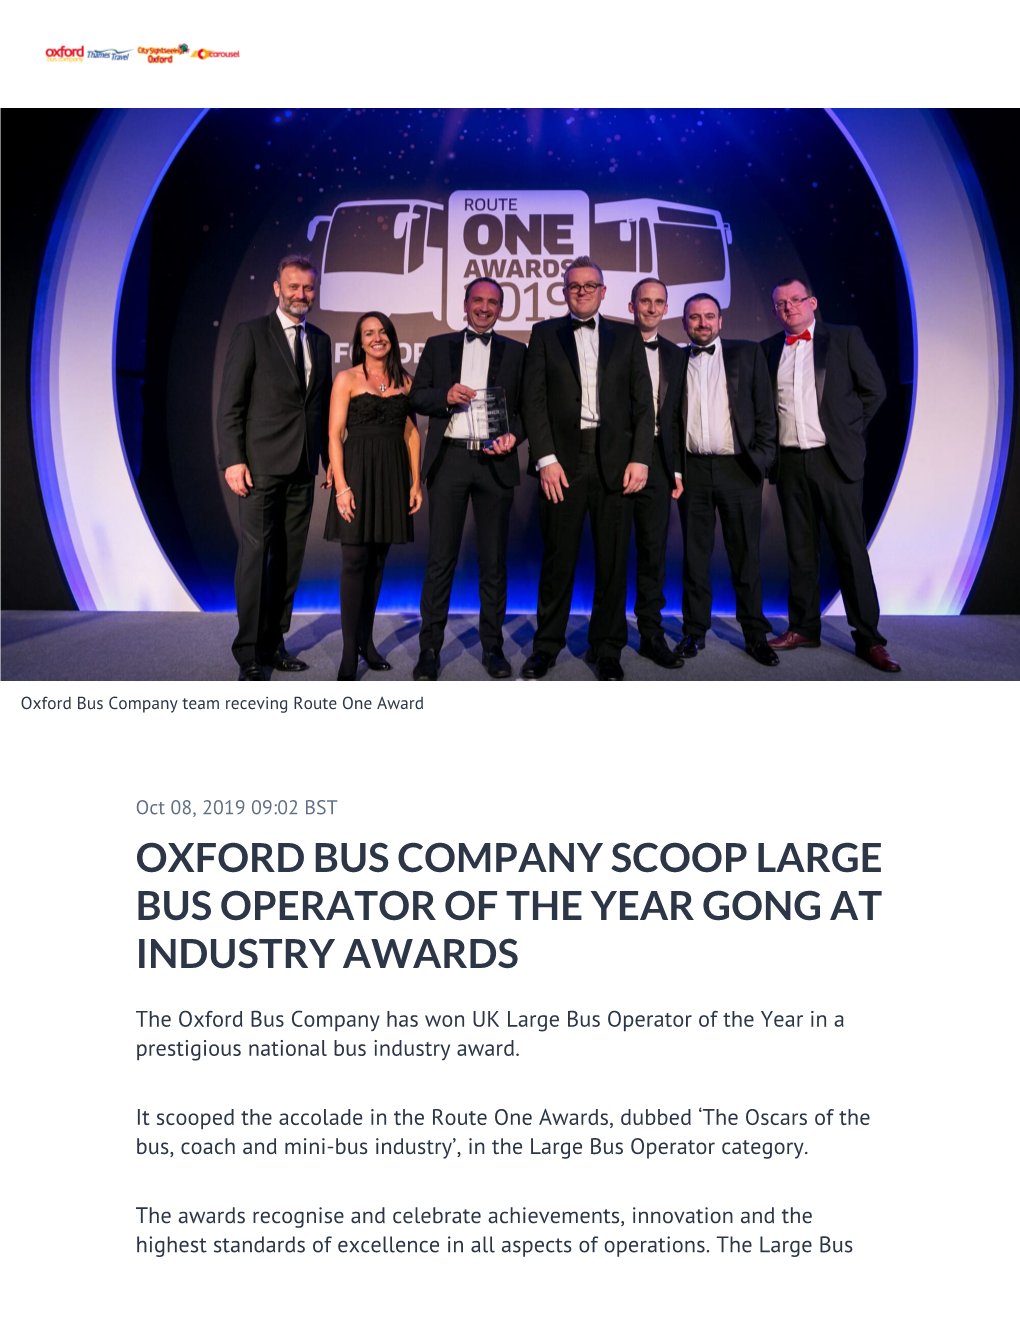 Oxford Bus Company Scoop Large Bus Operator of the Year Gong at Industry Awards